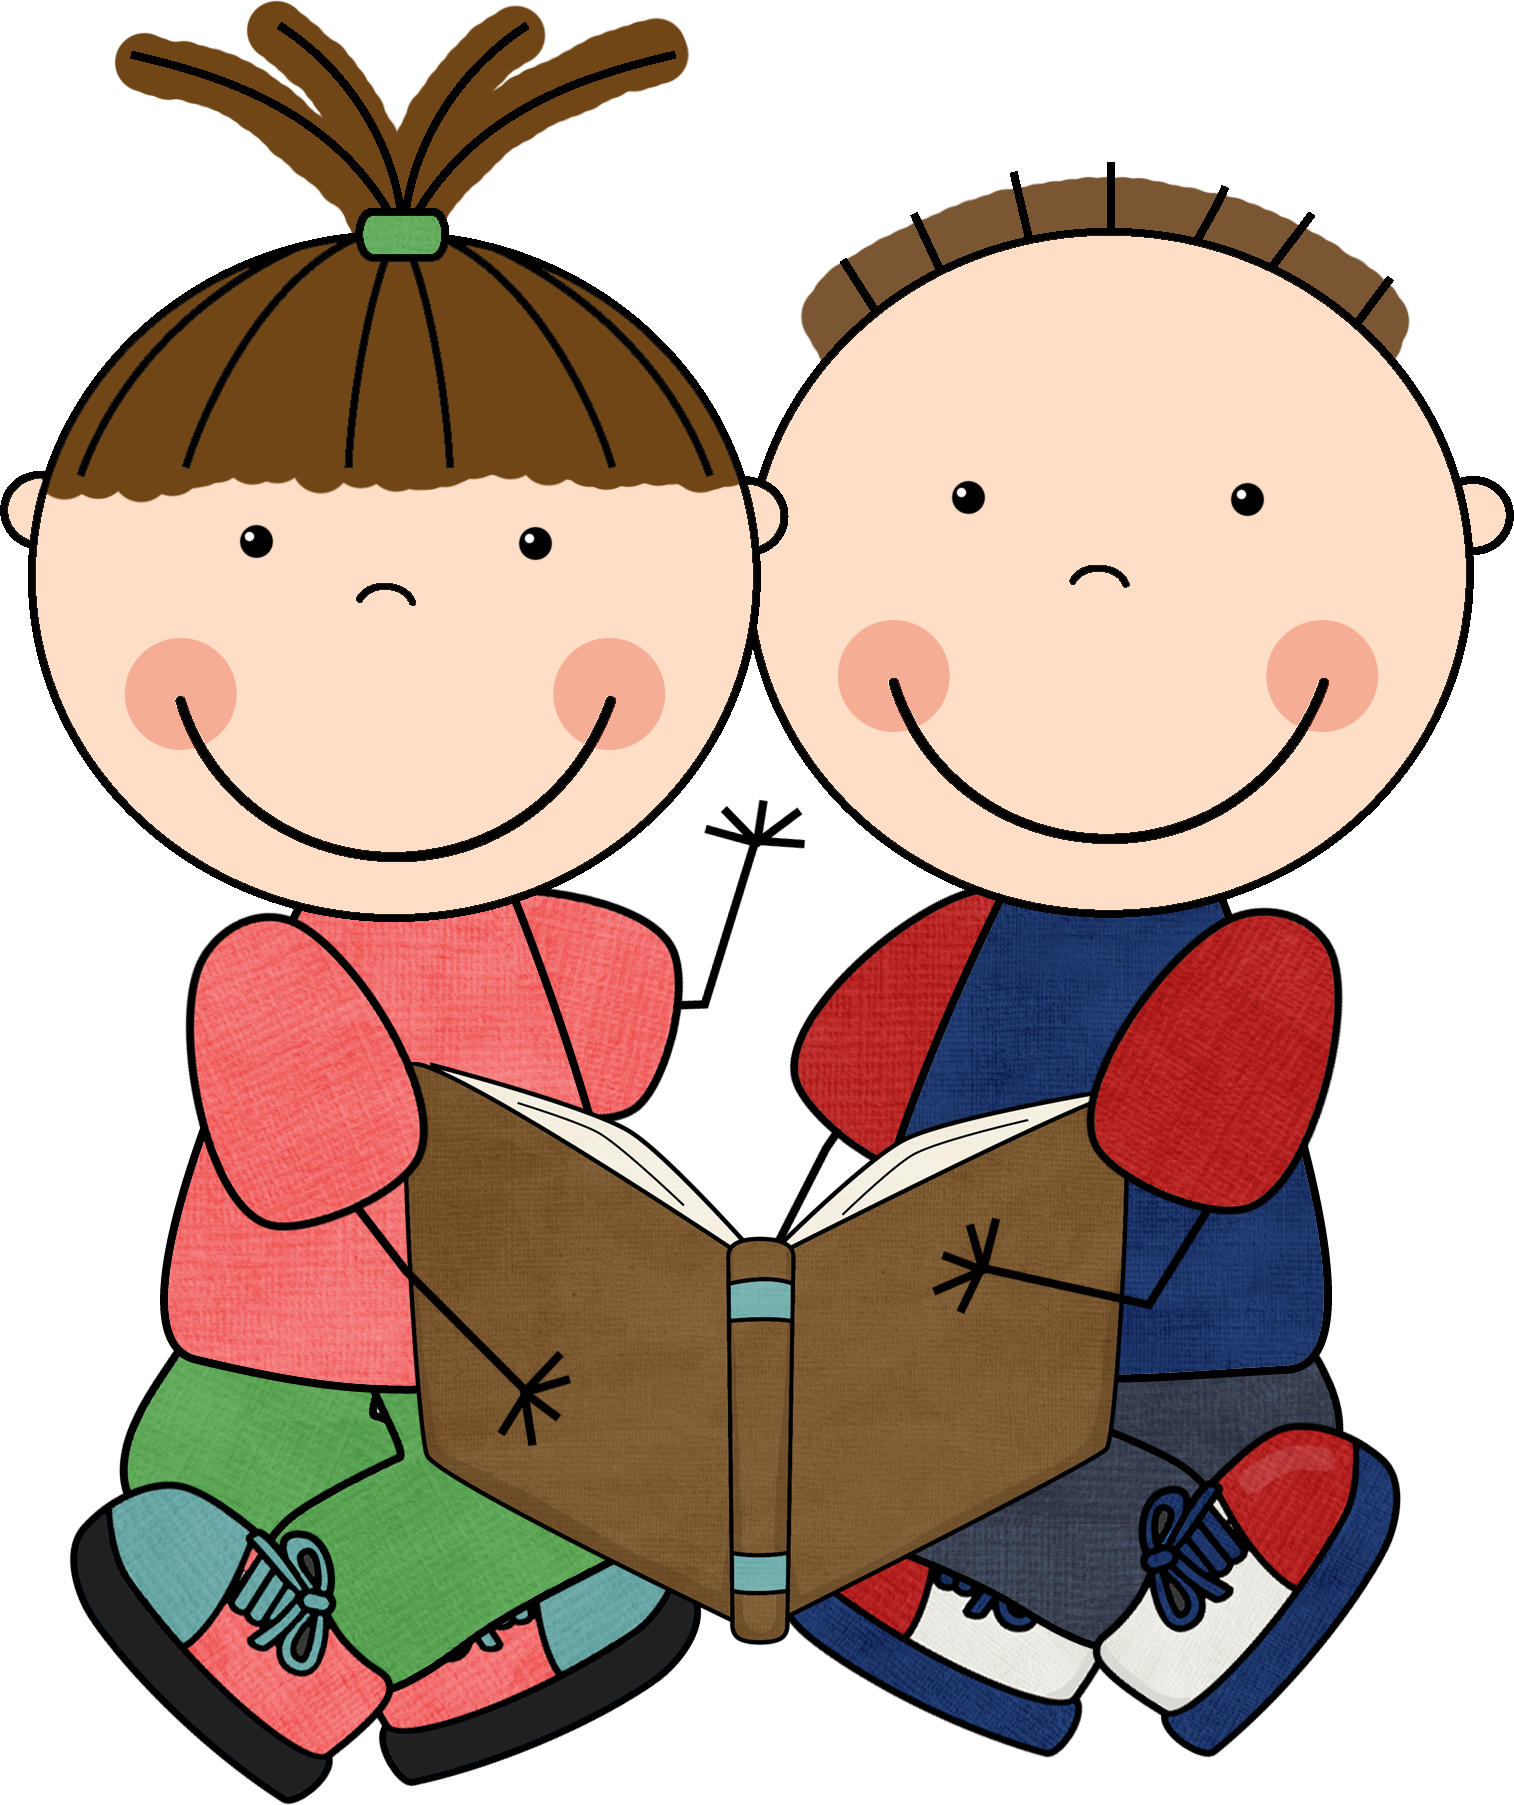 Read To Someone - Read To A Friend (1514x1805)